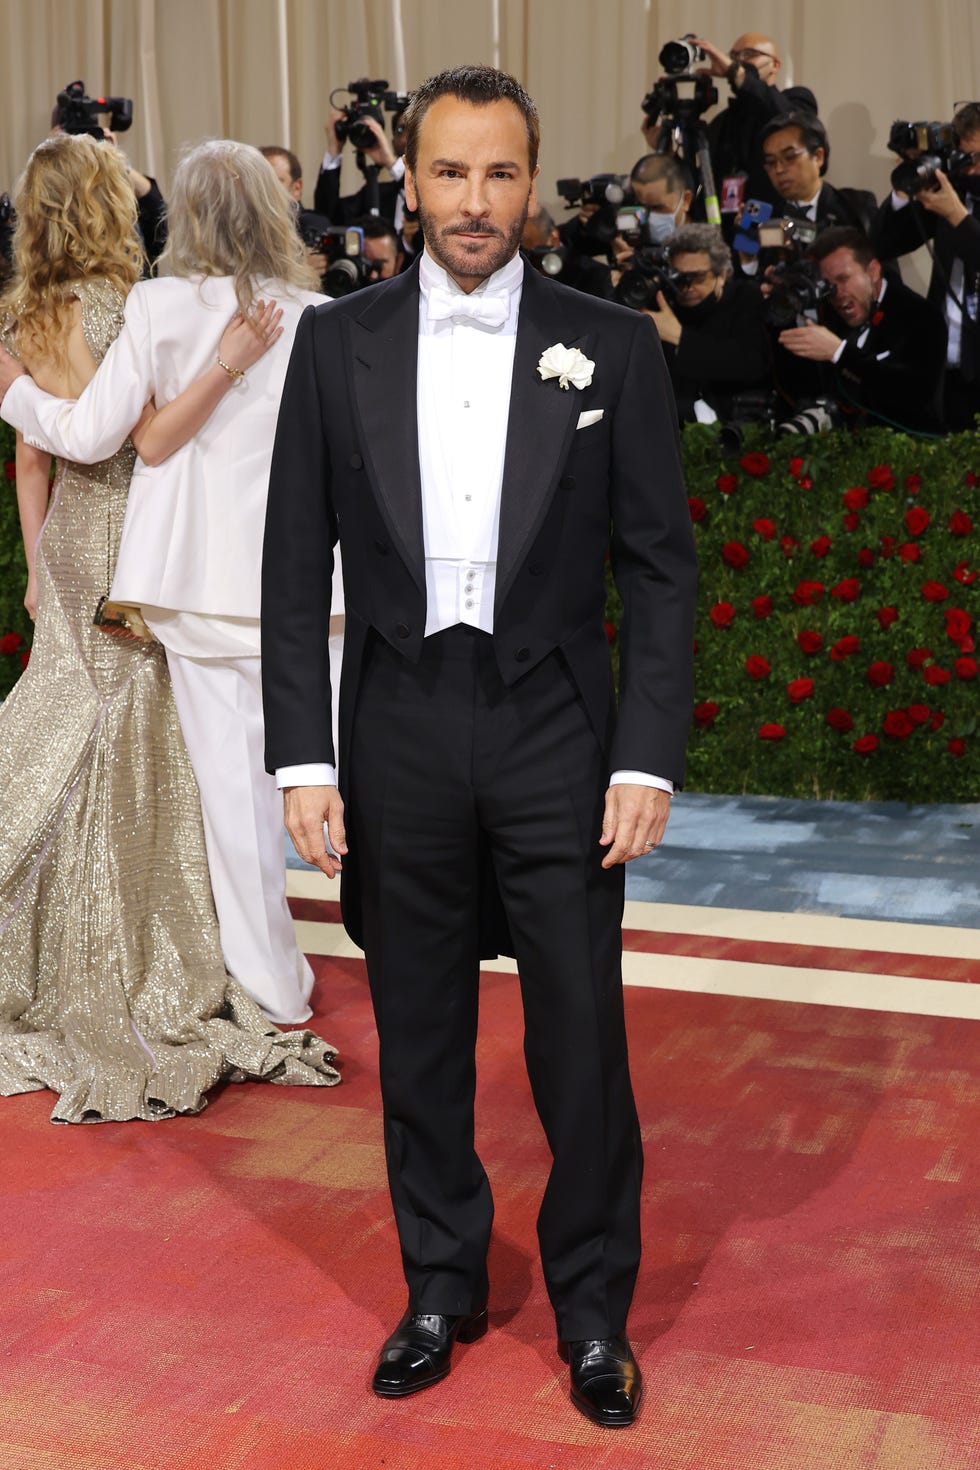 Tom Ford wore Tom Ford Suit @ the 2022 met gala